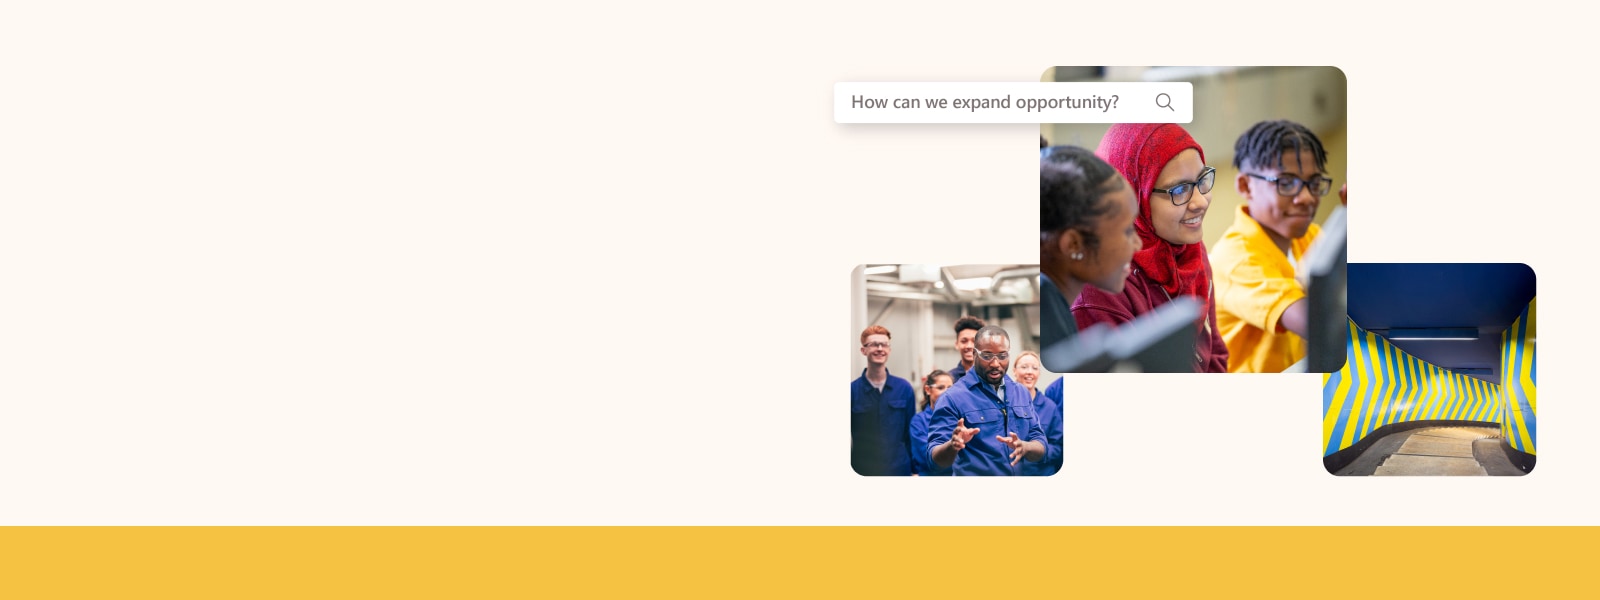 A collage featuring a man teaching some industrial workers, three students sitting in front of a computer, and an empty hallway with forward-pointing arrows on the walls accompanied by a search box with the question - How can we expand opportunity?